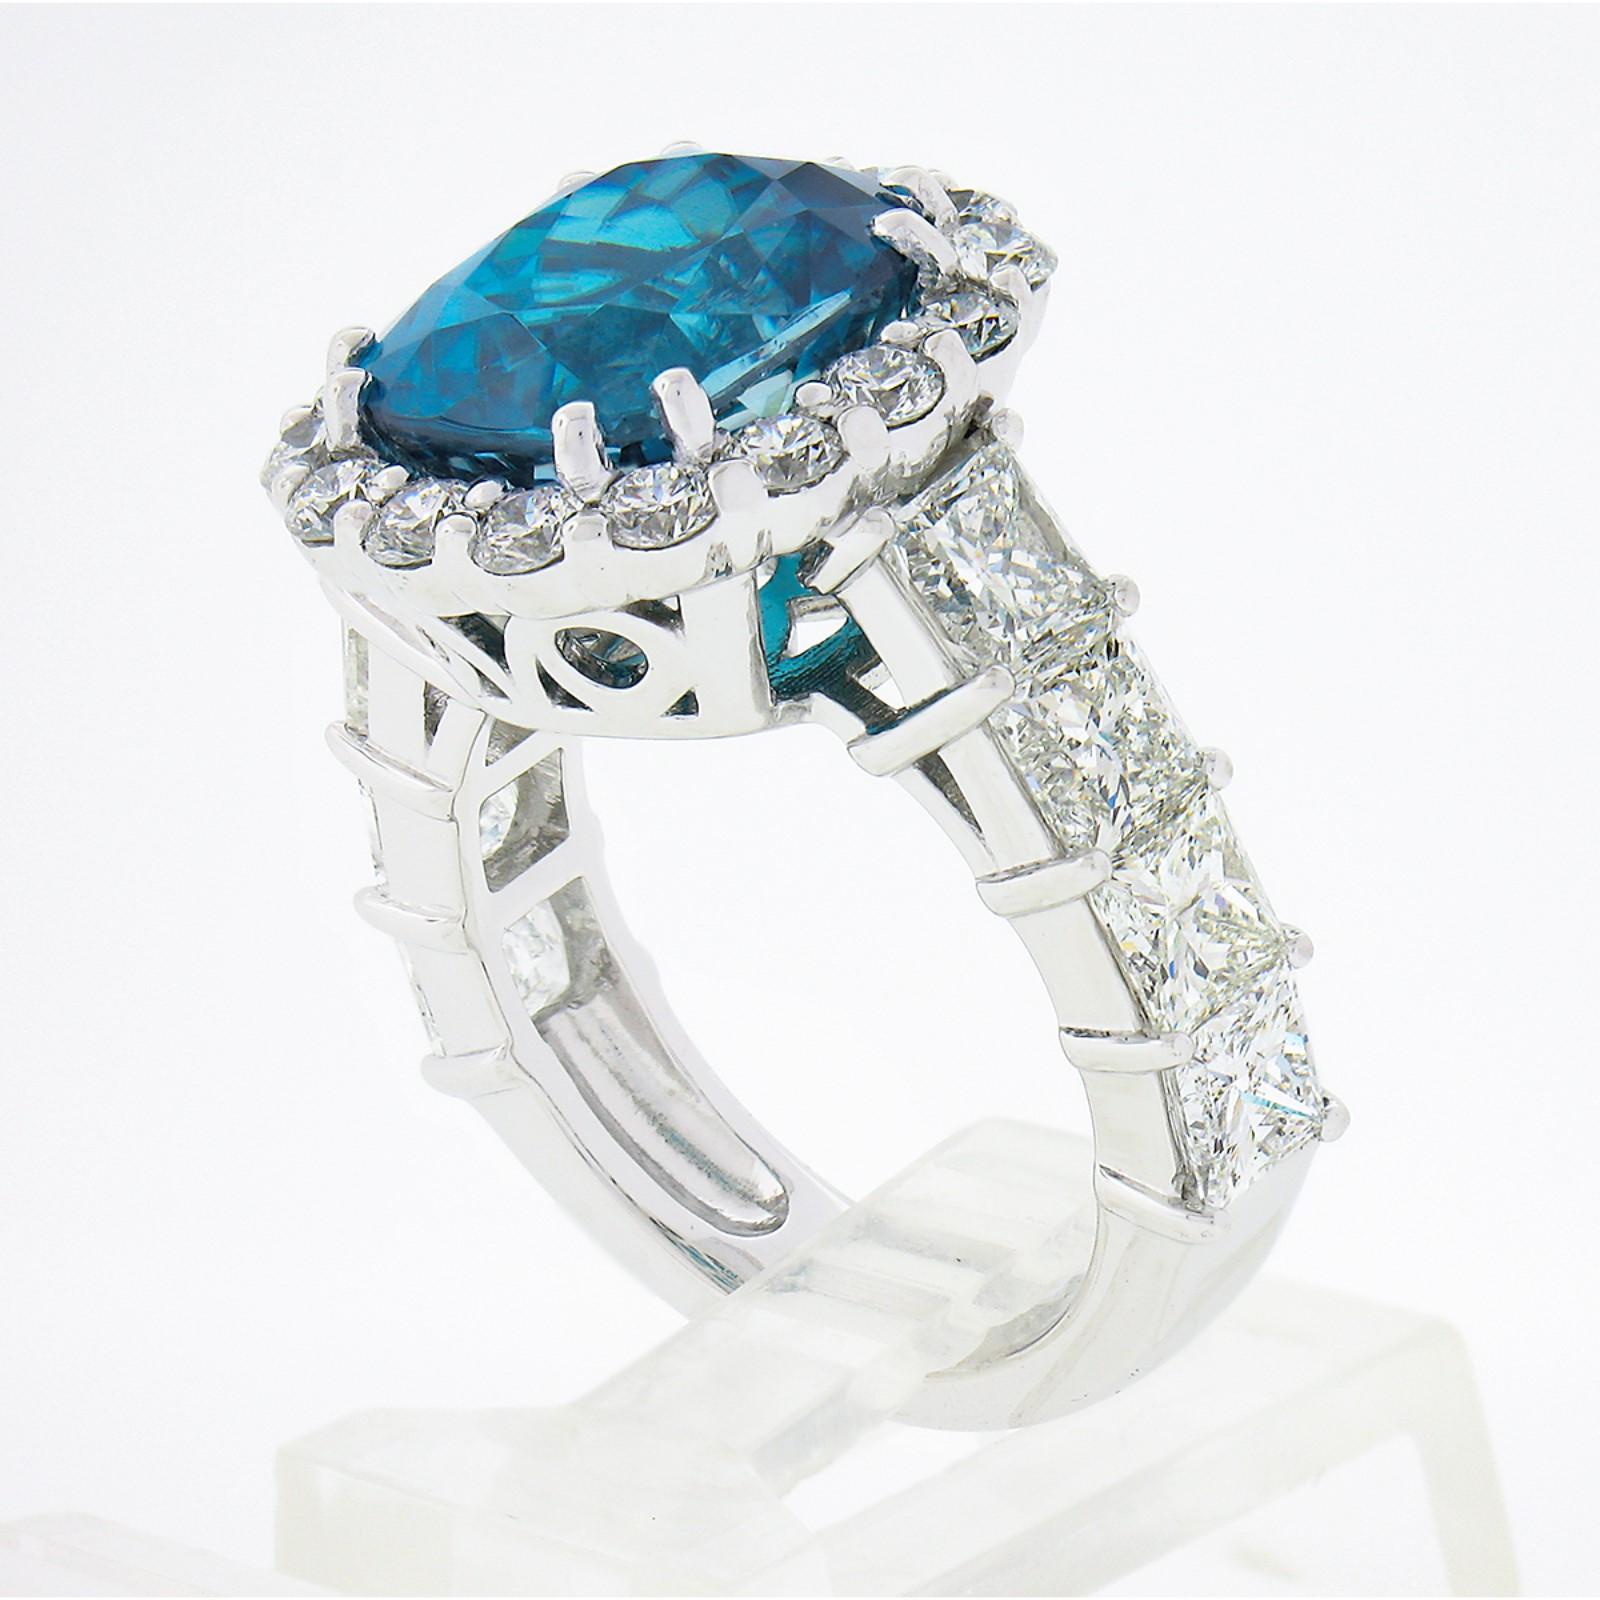 Platinum GIA 16.53ctw Large Cushion Blue Zircon Diamond Accents Cocktail Ring For Sale 5